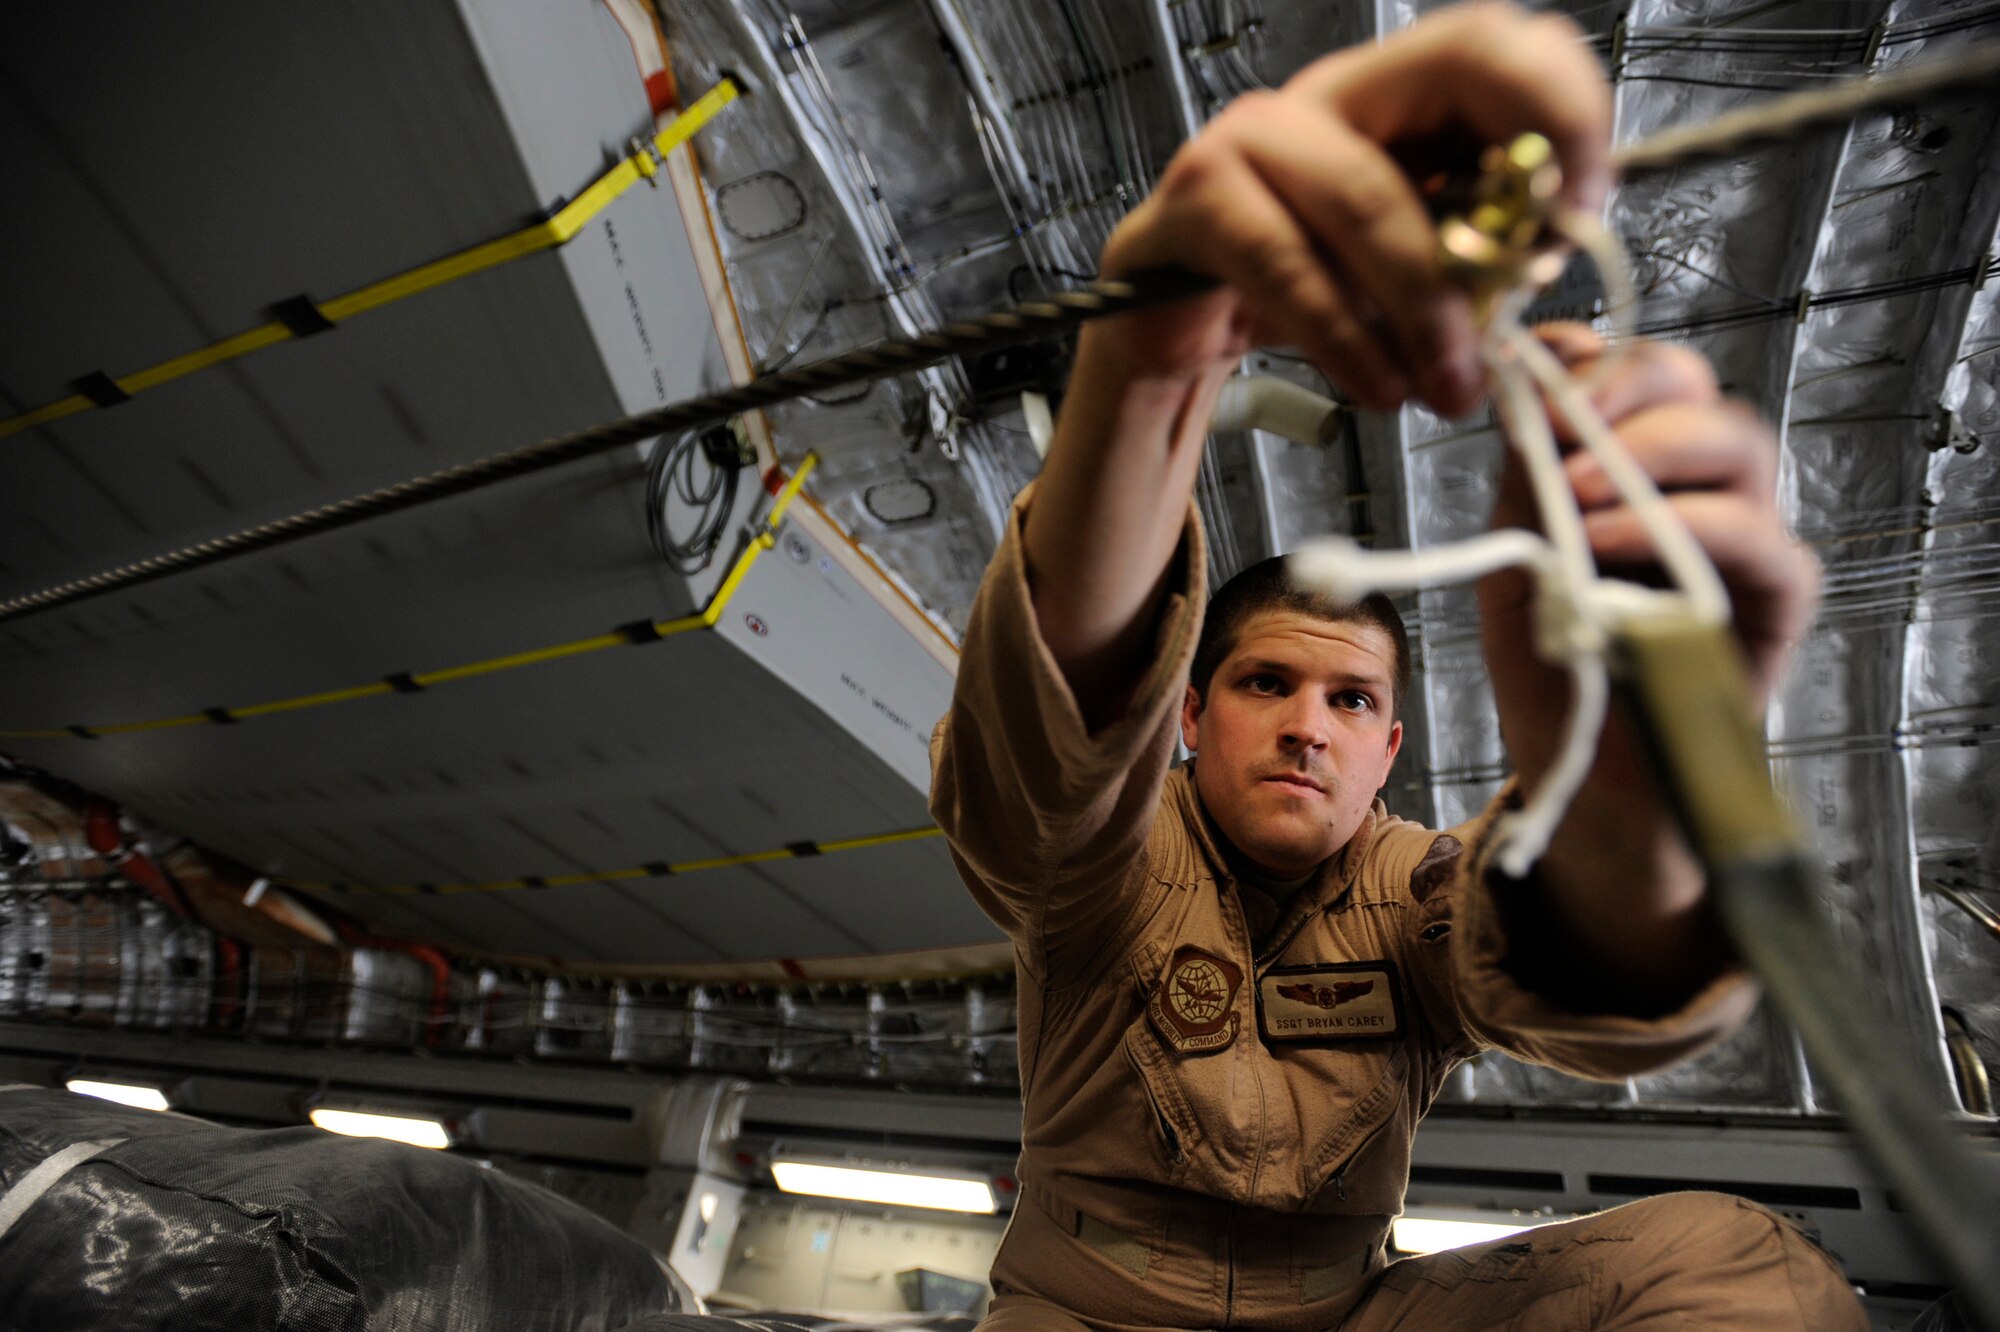 Staff Sgt. Bryan Carey, a C-17 Globemaster III loadmaster assigned to the 816th Expeditionary Airlift Squadron, hooks parachute draw cords to container-delivery-system bundles prior to take off for an airdrop mission May 9, 2010, at a base in Southwest Asia. (U.S. Air Force photo/Staff Sgt. Manuel J. Martinez/released)
